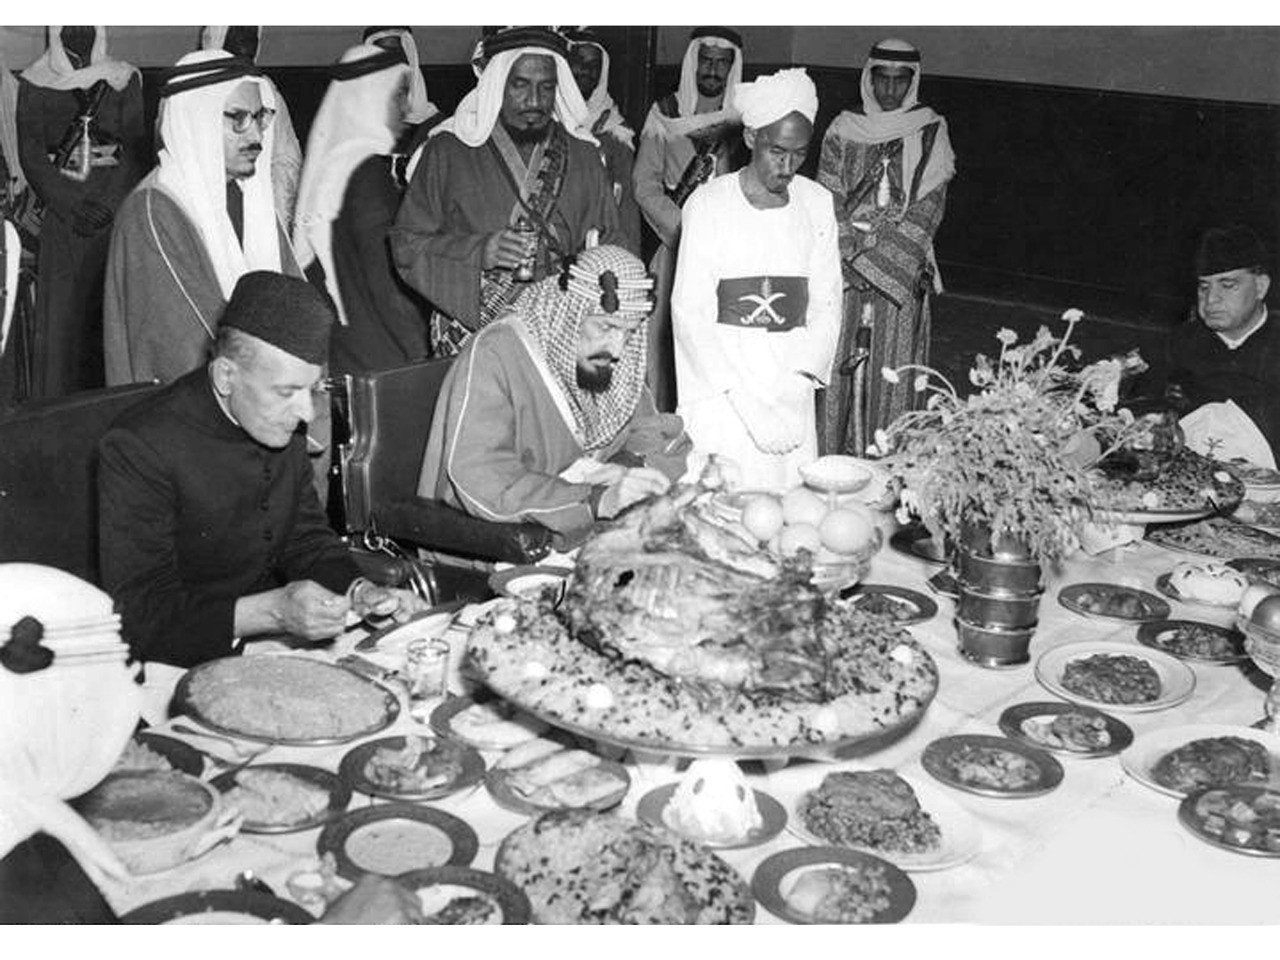 Dr. Hakim (right) at a banquet hosted by King Ibne Saud of Saudi Arabia where he was presented with a royal robe and sword in 1953. Seated on the left is Governor General of Pakistan Ghulam Muhammad, and standing behind in glasses is Muhammad Asad the Austro-Hungarian-born Jew who converted to Islam and translated the Quran into English